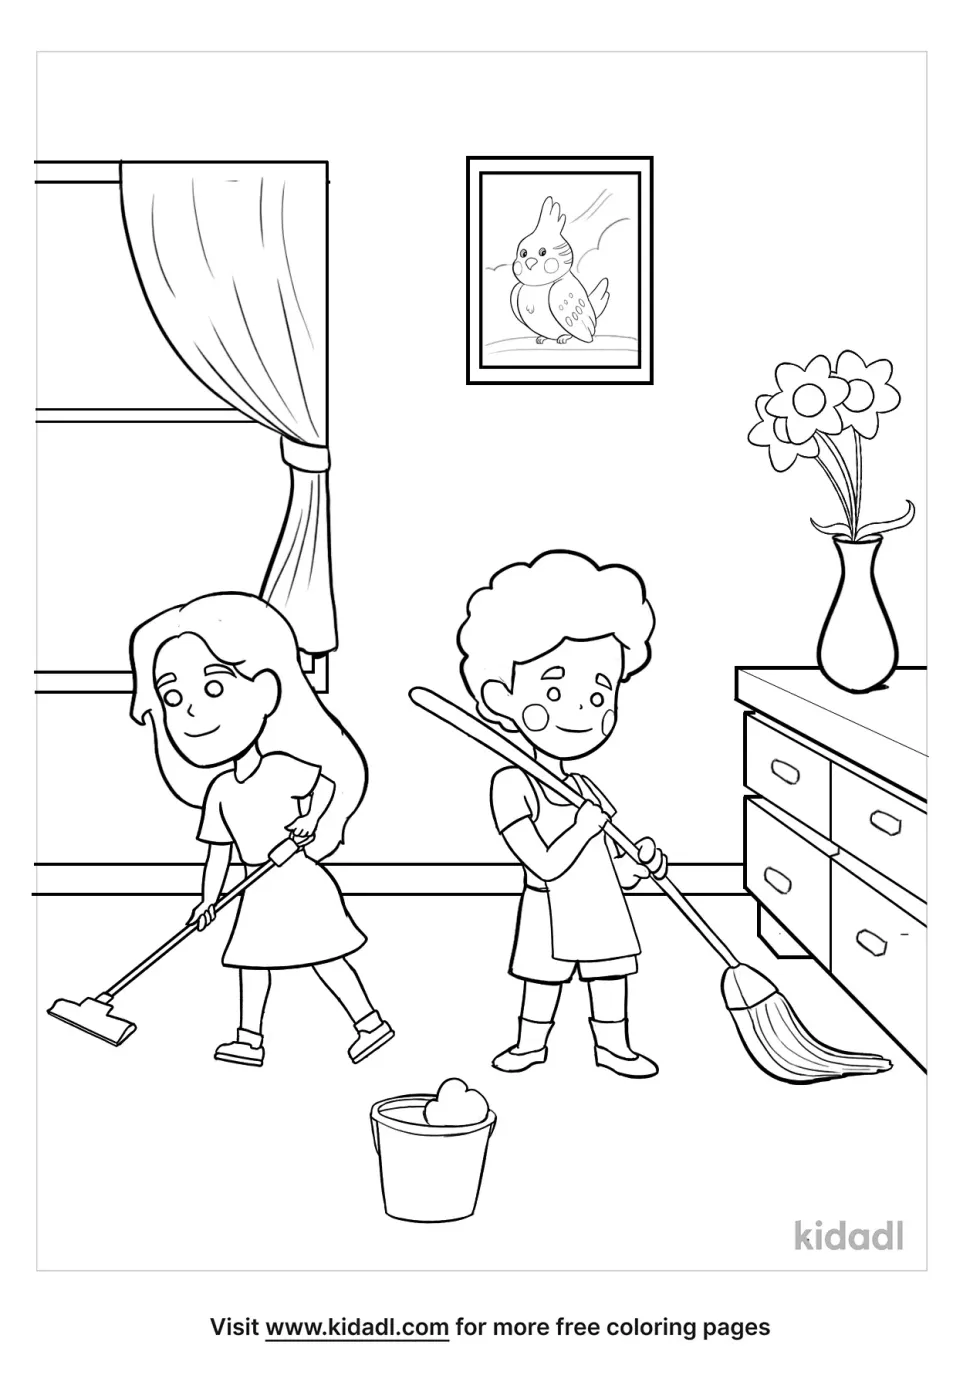 Cleaning Room Coloring Page